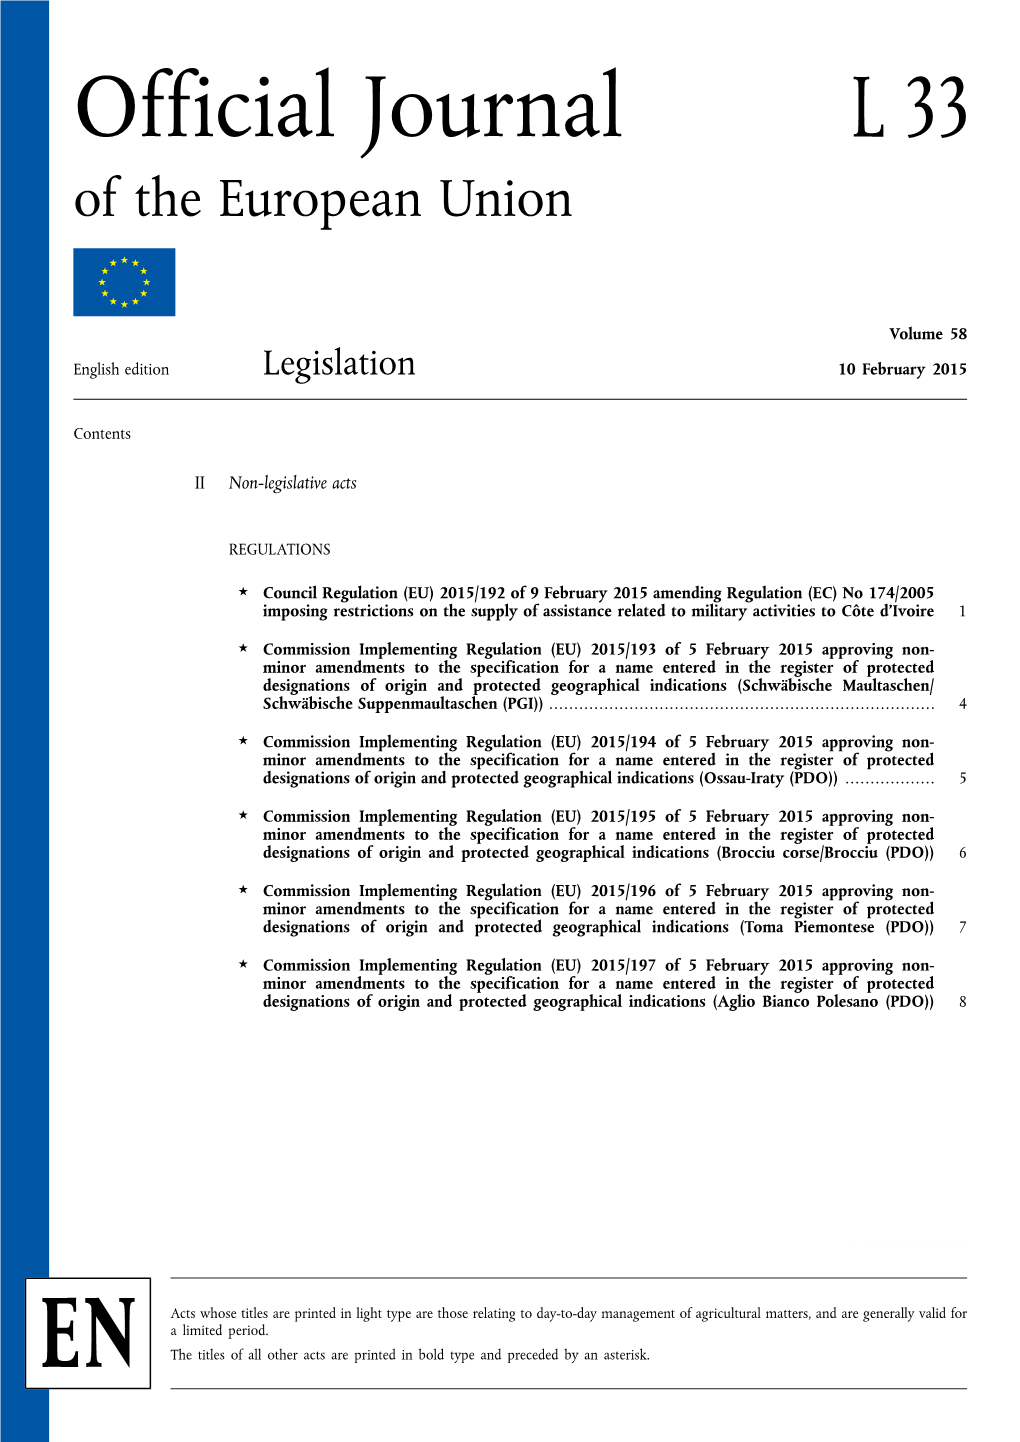 Official Journal L 33 of the European Union